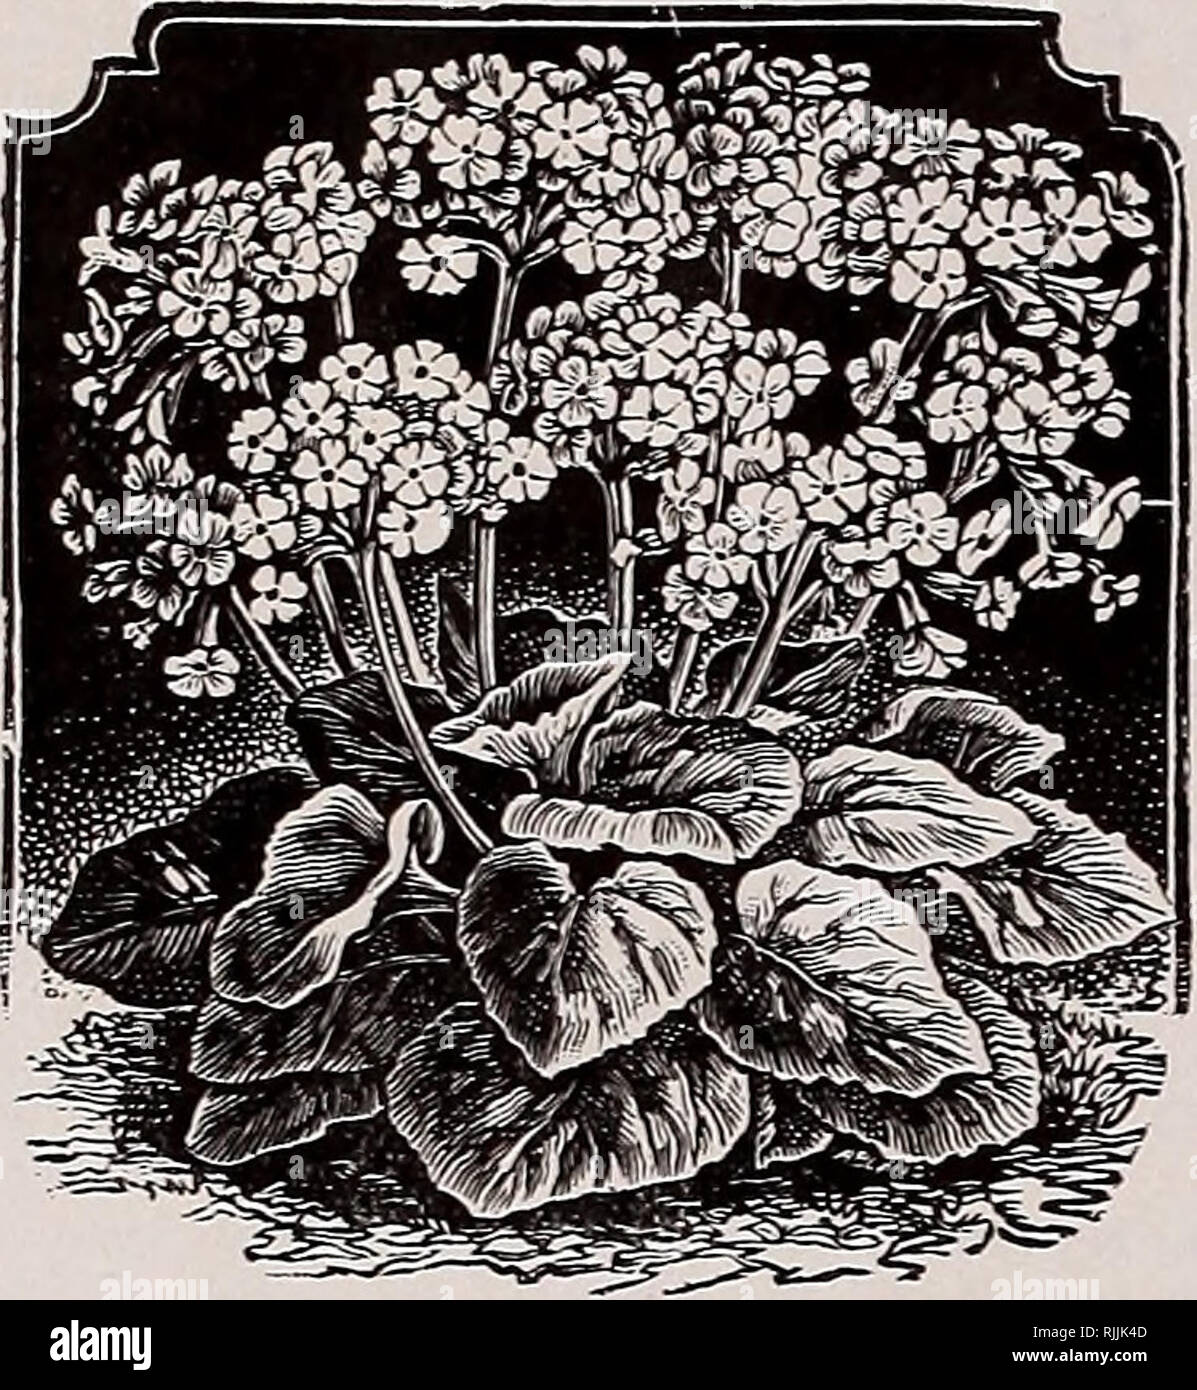 . Beckert's garden, flower and lawn seeds. Commercial catalogs Seeds; Vegetables Seeds Catalogs; Bulbs (Plants) Seeds Catalogs; Fruit Seeds Catalogs; Flowers Seeds Catalogs; Garden tools Catalogs. 46 Wm. C. Beckert's Seeds of Greenhouse Plants, Pittsbnrg, Pa.. PRIMUX^A. OBCOXICA PRIMULA. FRINGED DOUBLE-FLOWERING These fine doubles come almost true from seed. Alba flore pleno. Double white. Pkt. 50 cts. Carminea flore pleno. Double red. Pkt. 50c. Double Mtxed. Pkt. 50 cts. Chlnensis SteUata (Star Primroses). A very useful new class. iSTice for pot cul- ture or cutting. Sev- eral varieties have  Stock Photo